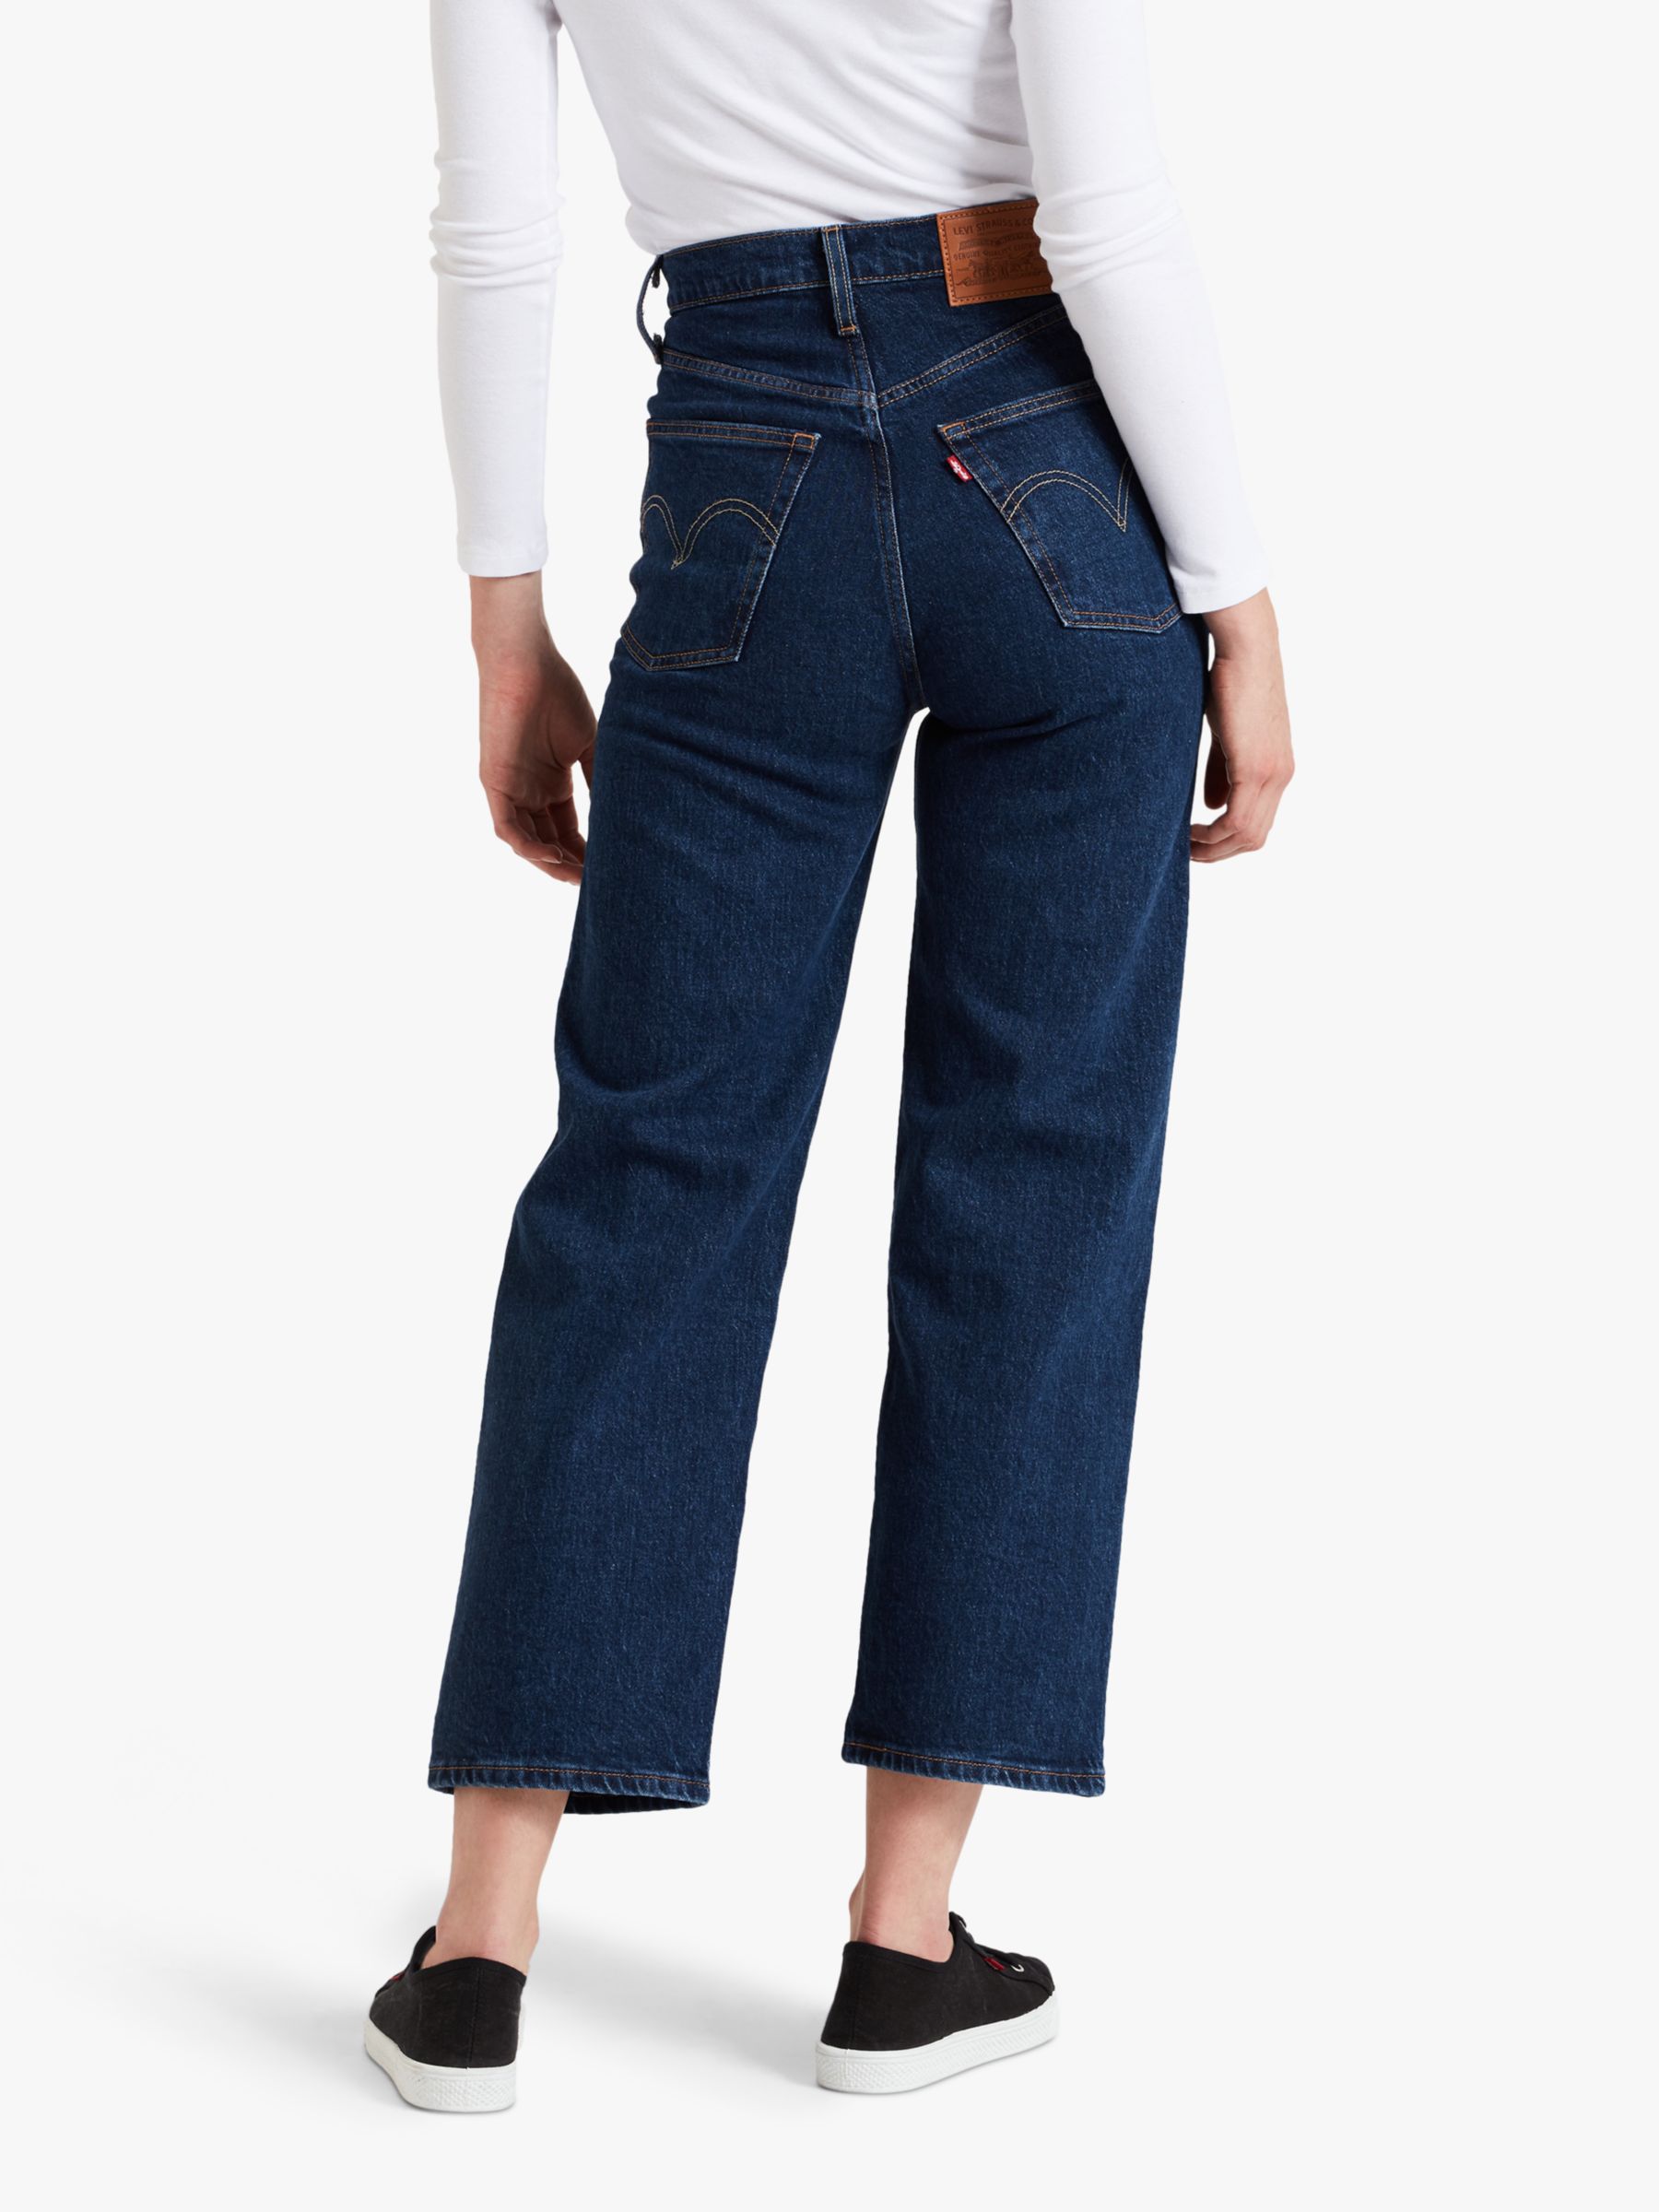 Levi's Ribcage Straight Ankle Jeans 